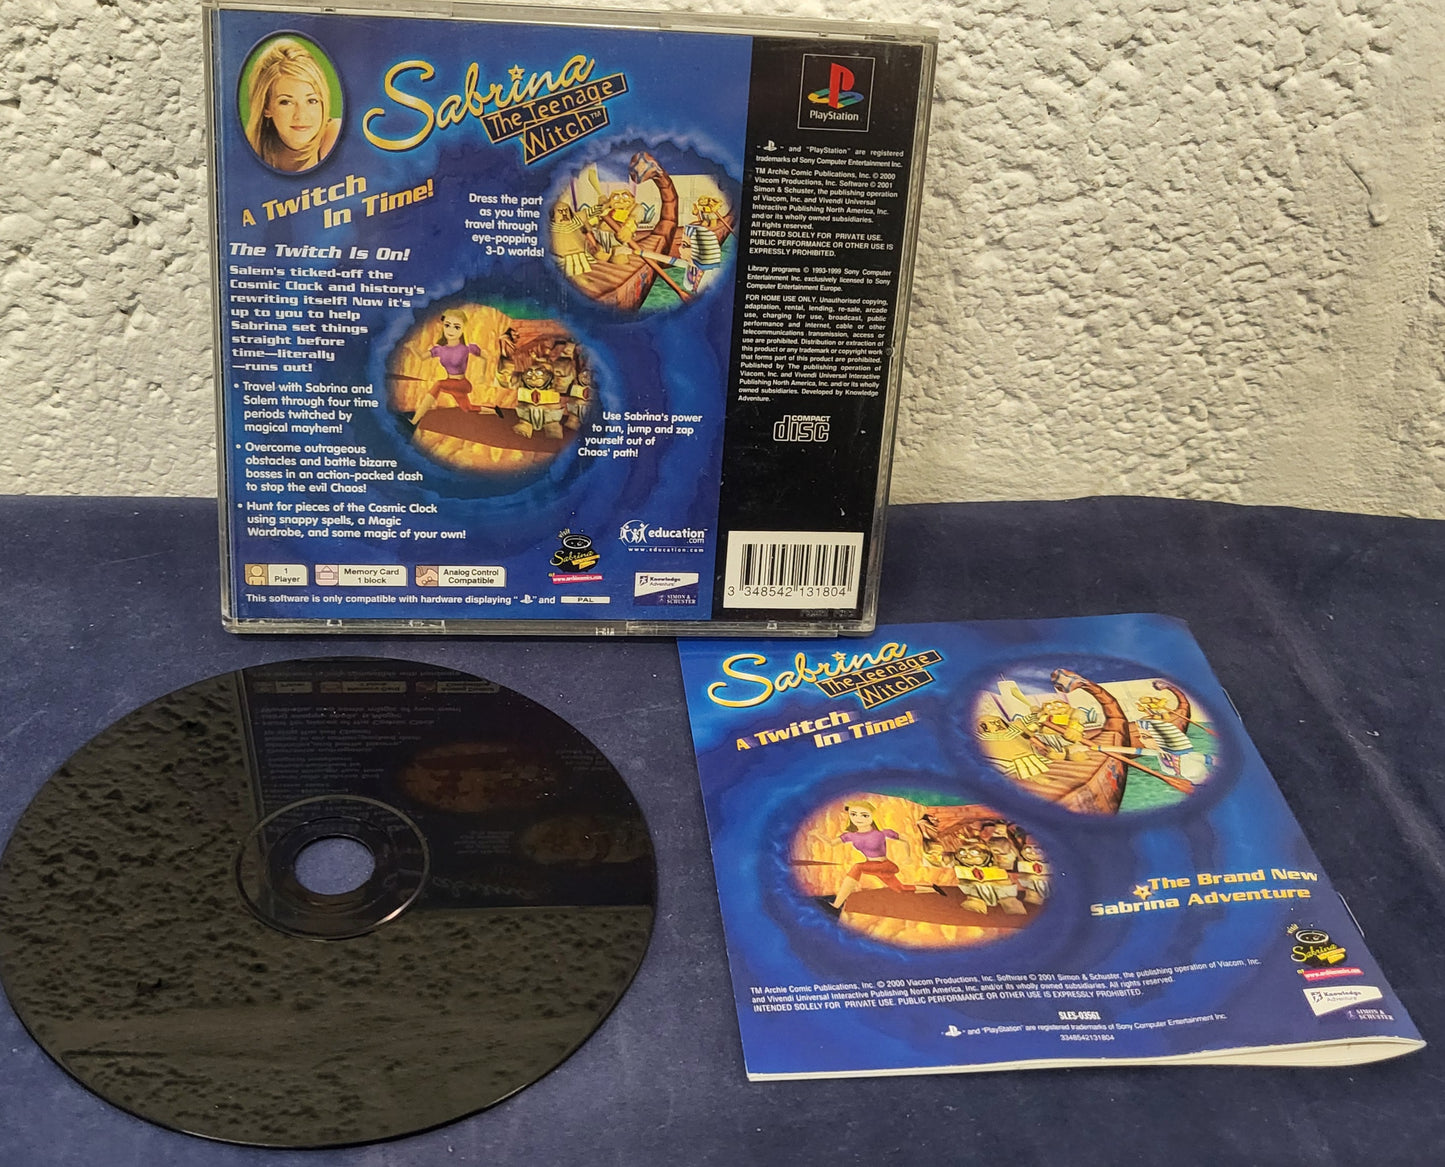 Sabrina the Teenage Witch a Twitch in Time Sony Playstation 1 (PS1) Game